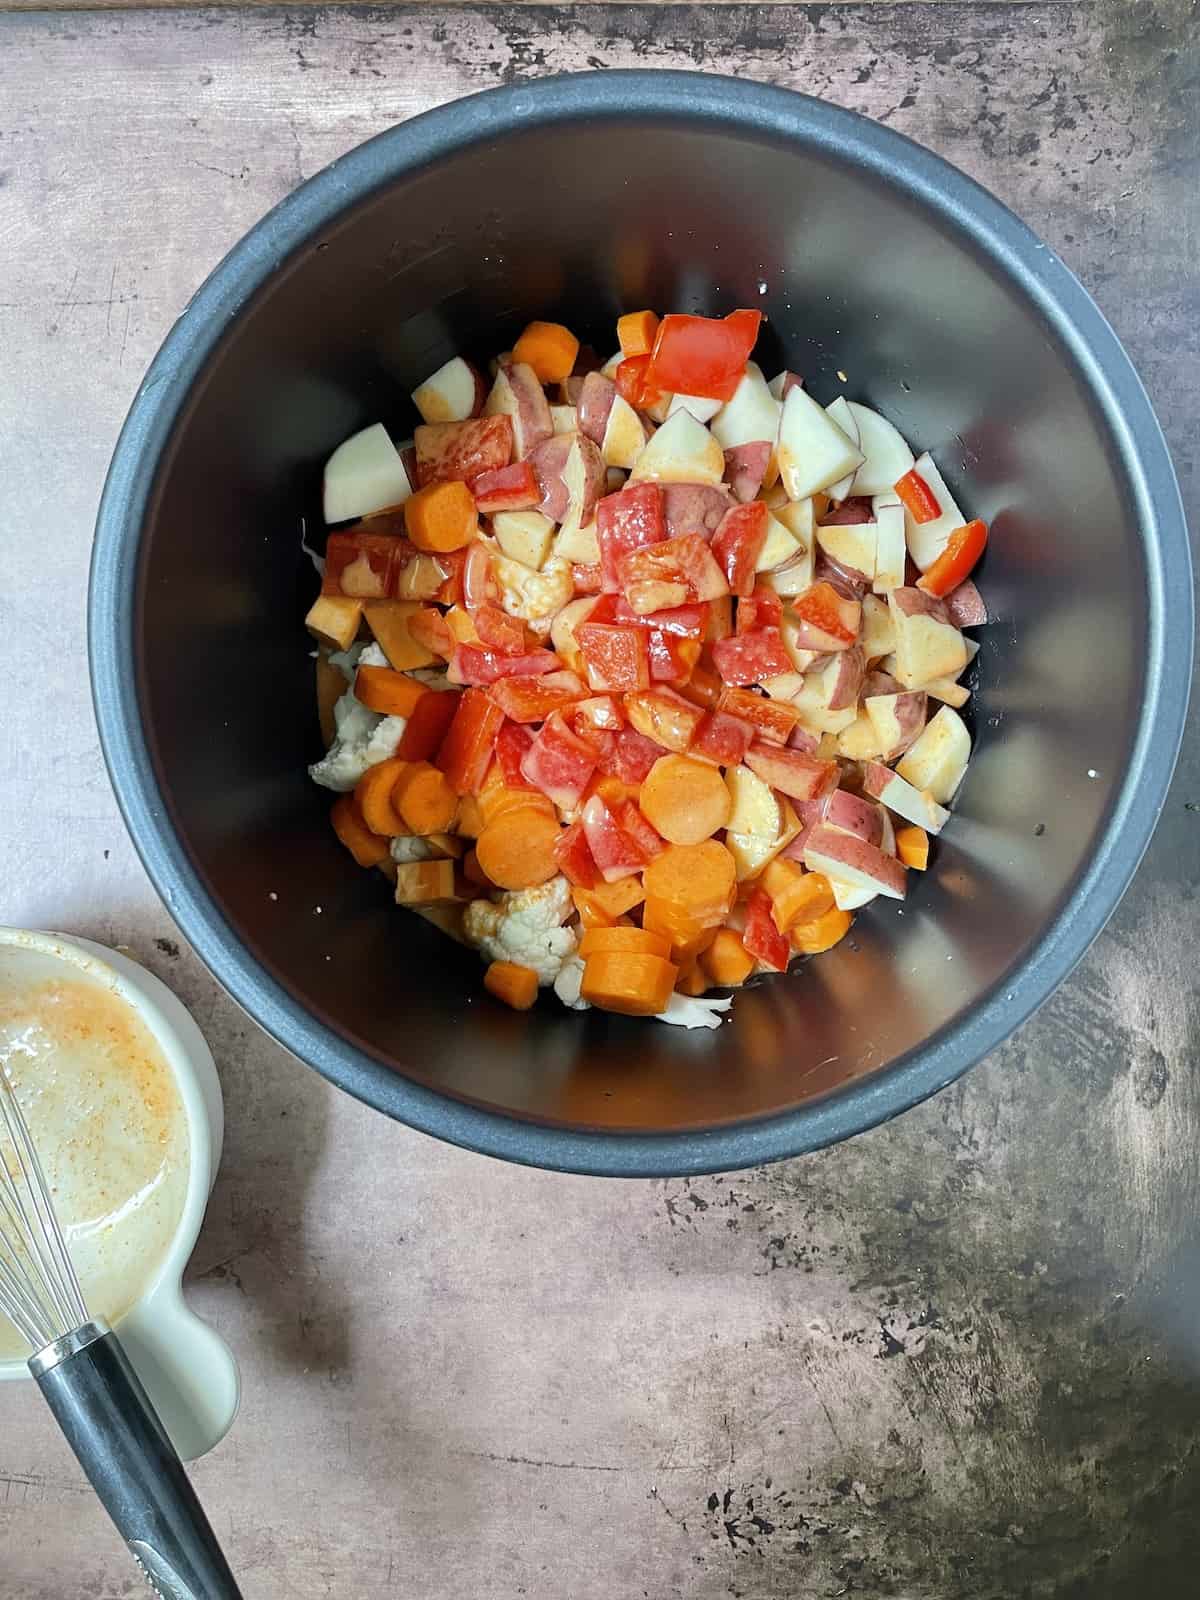 Veggies in slow cooker with sauce poured on top.